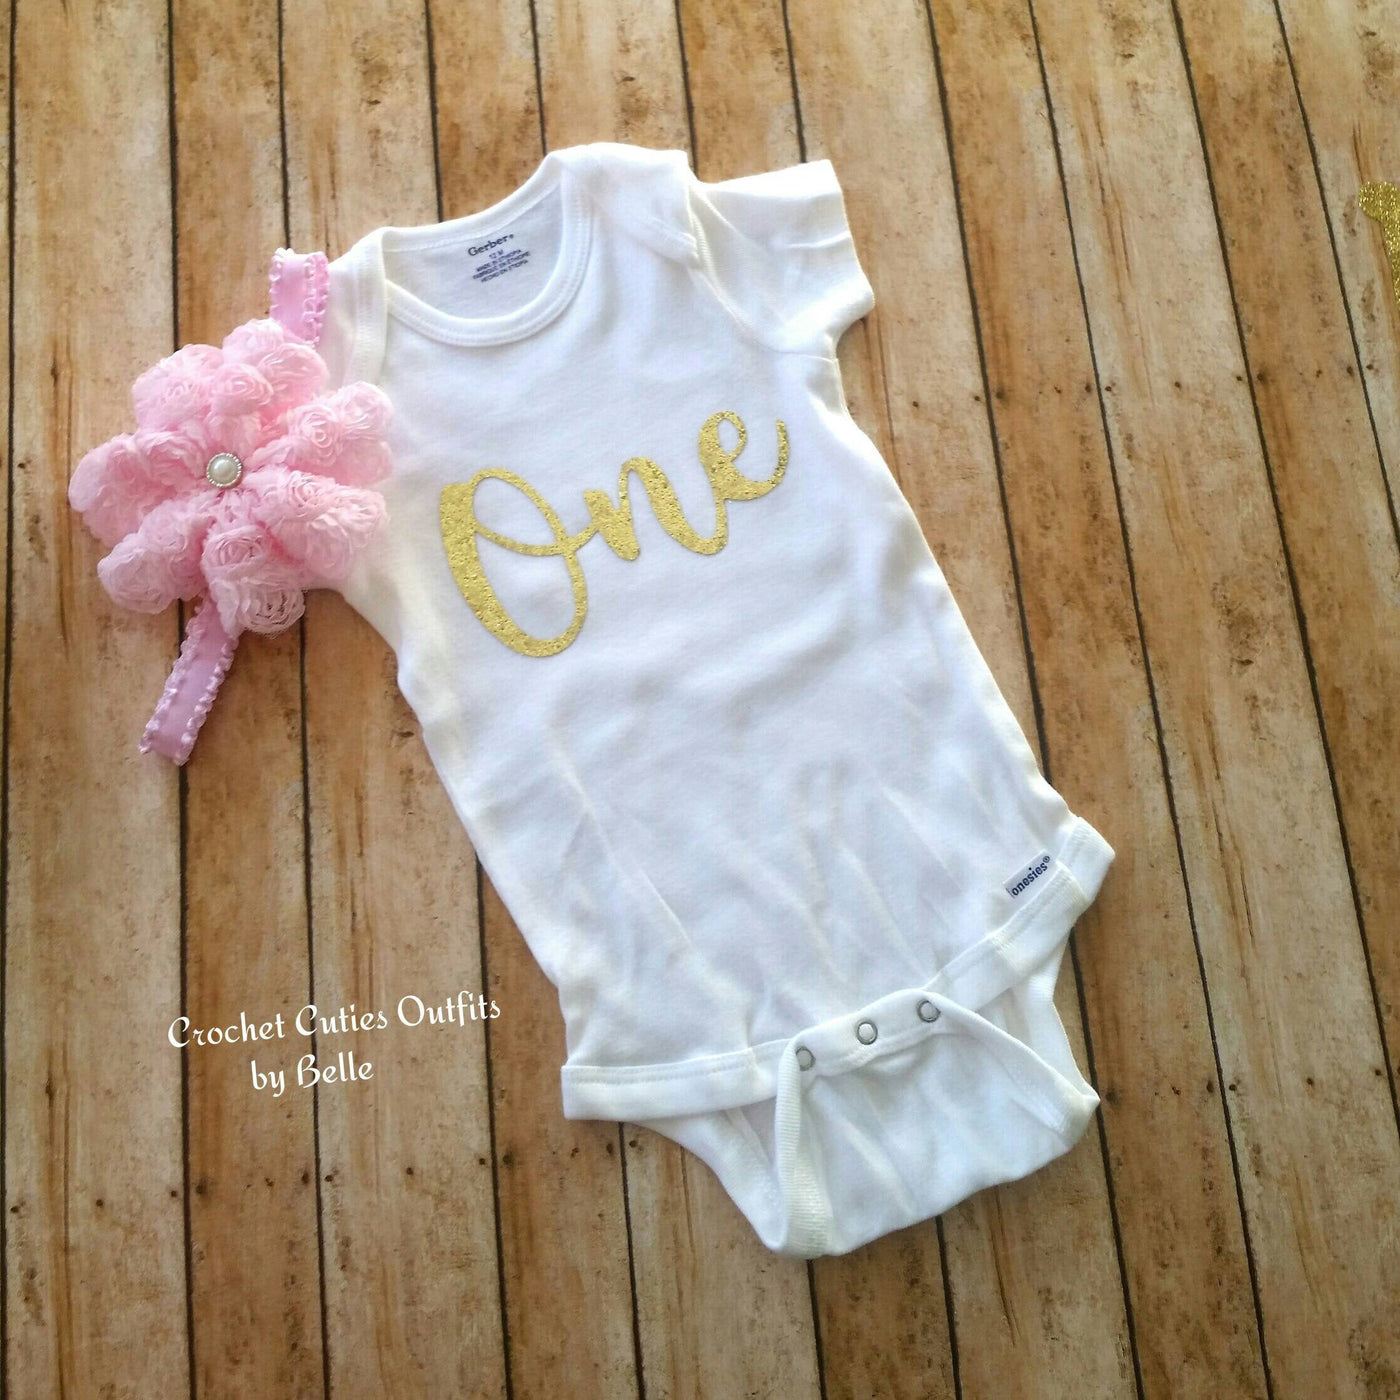 Tutu Baby Outfit, Photo Prop Baby Outfit, Baby Girl Skirt Infant Outfits, First Birthday